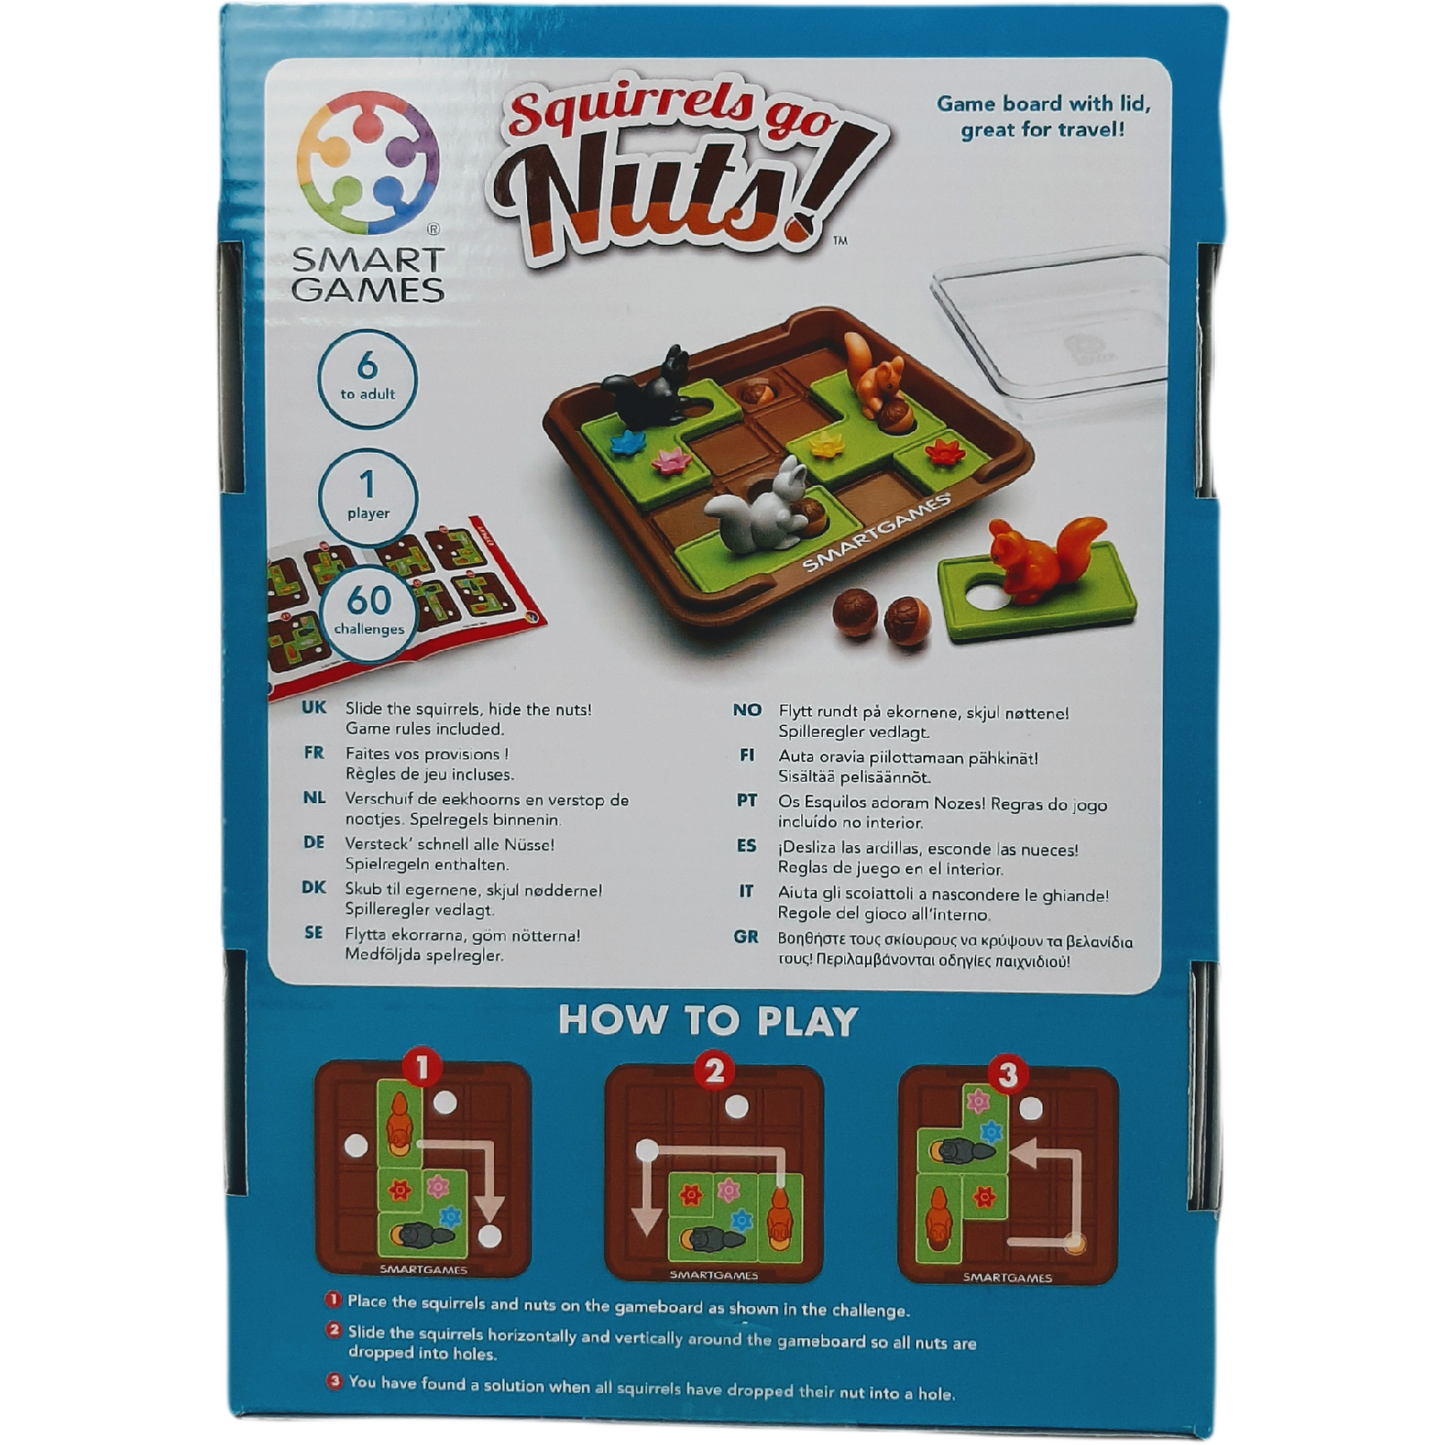 Winter is coming, so let’s go nuts! (Age 6+, 60 Challenges, 1 Player) Help the squirrels get ready for winter! Can you move the squirrels around and hide their acorns underground? “Squirrels Go Nuts” is a sliding puzzle game with 60 nutty challenges to test your skills. Compact game board with lid, 4 squirrels, 5 nuts, booklet with 60 challenges and solutions Stimulates the following cognitive skills: concentration, planning, problem solving, spatial insight